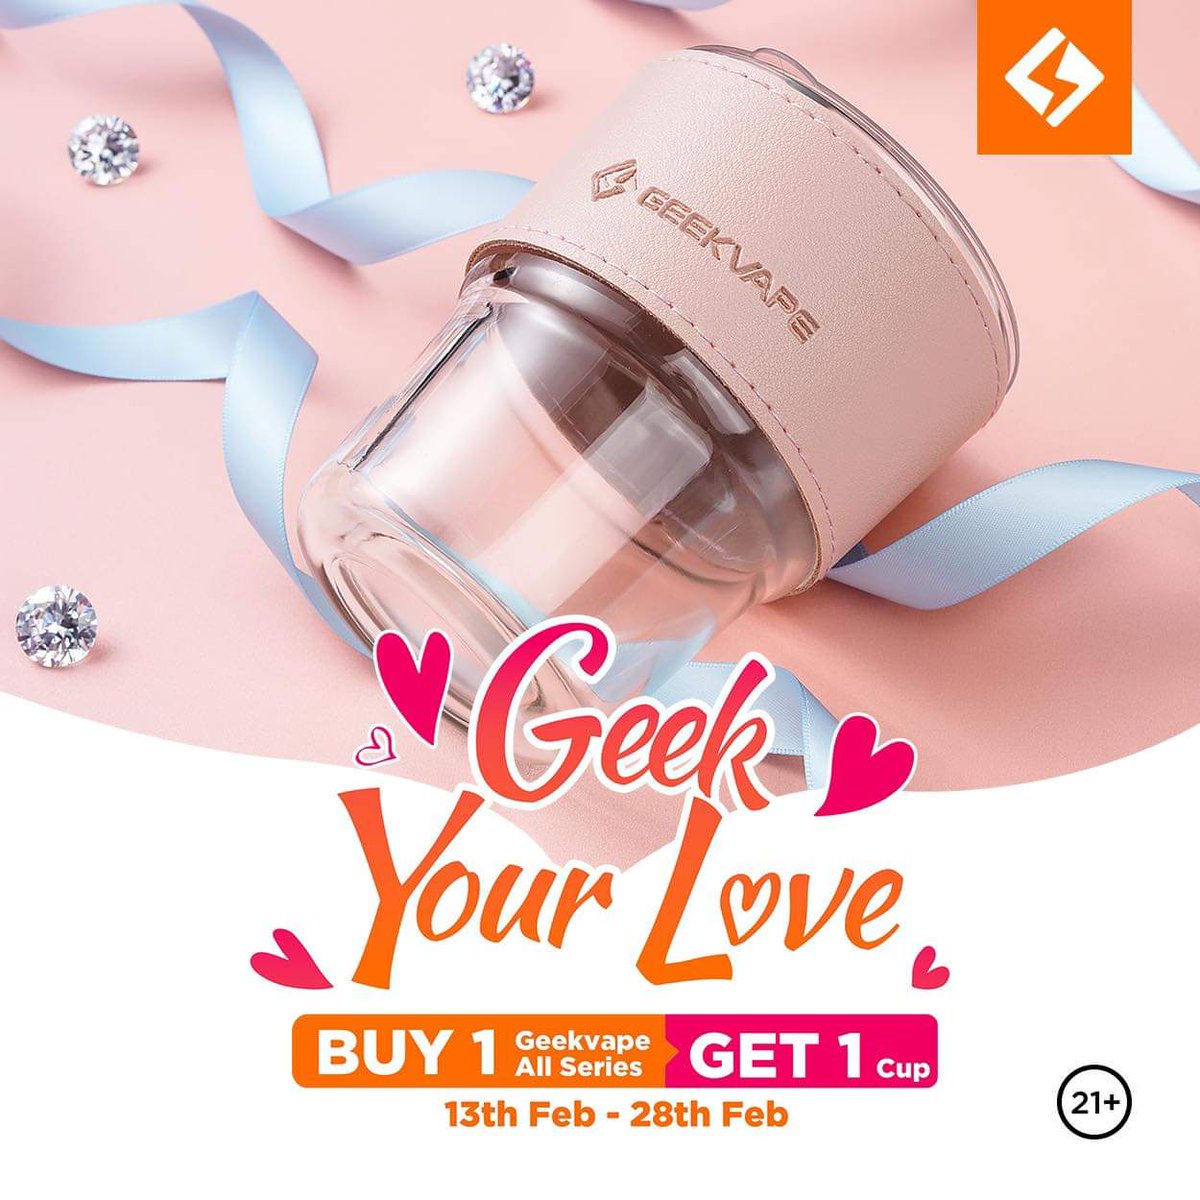 It’s the season of love! 

For any purchase of Geek products, you’d get a free Valentine’s Cup for your partner. 😍😍

Check your nearest stores for availability! 🥰
#Geekvp #GeekvpPH #ValentinesDay #GeekvpPhilippines #seasonoflove #vday2023